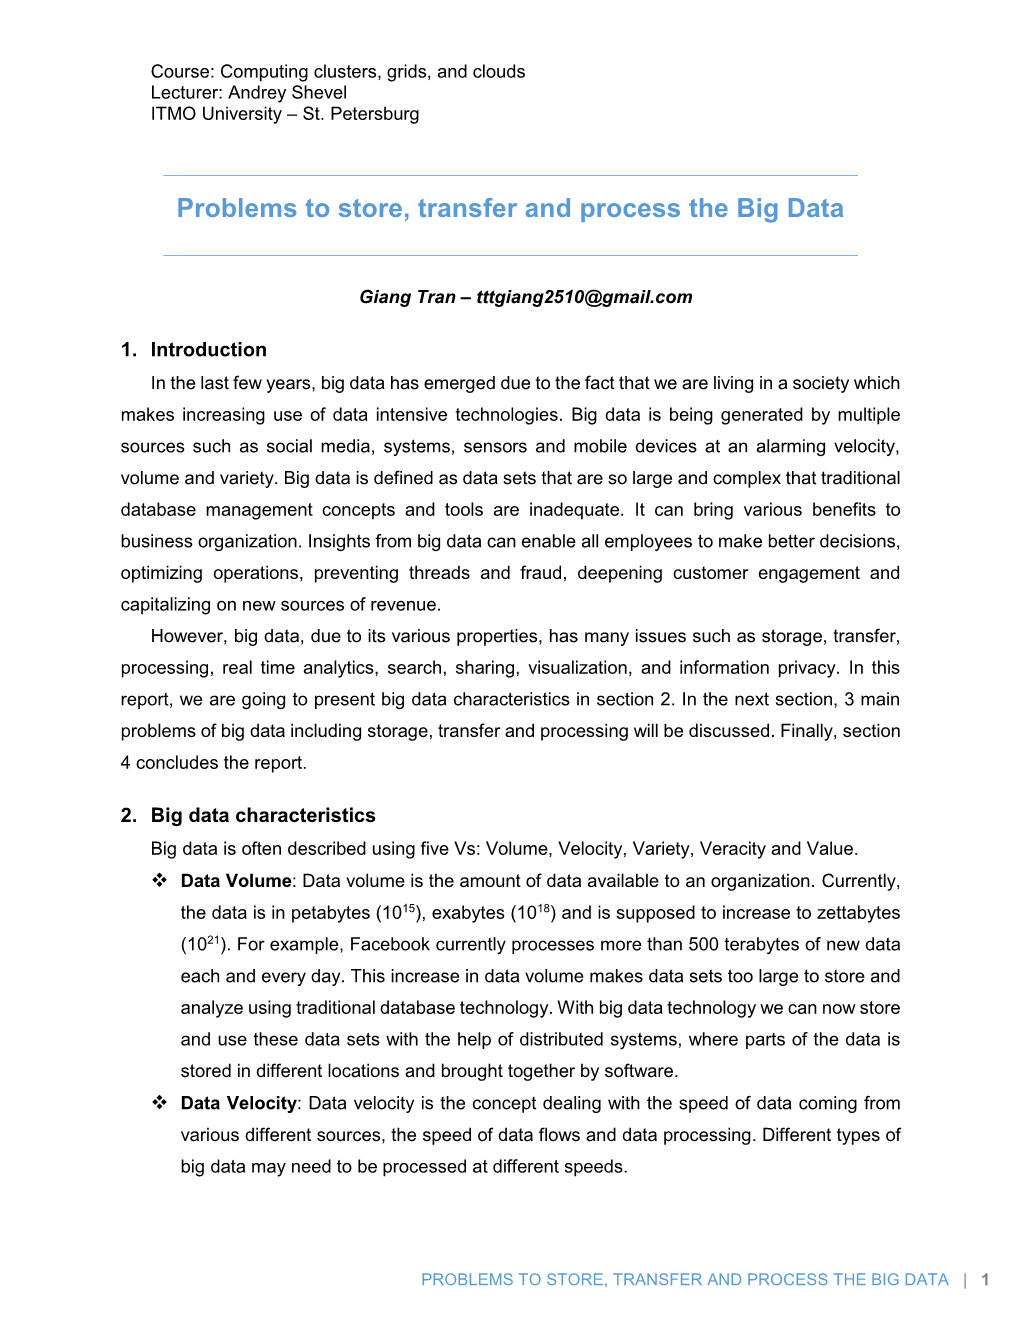 Problems to Store, Transfer and Process the Big Data